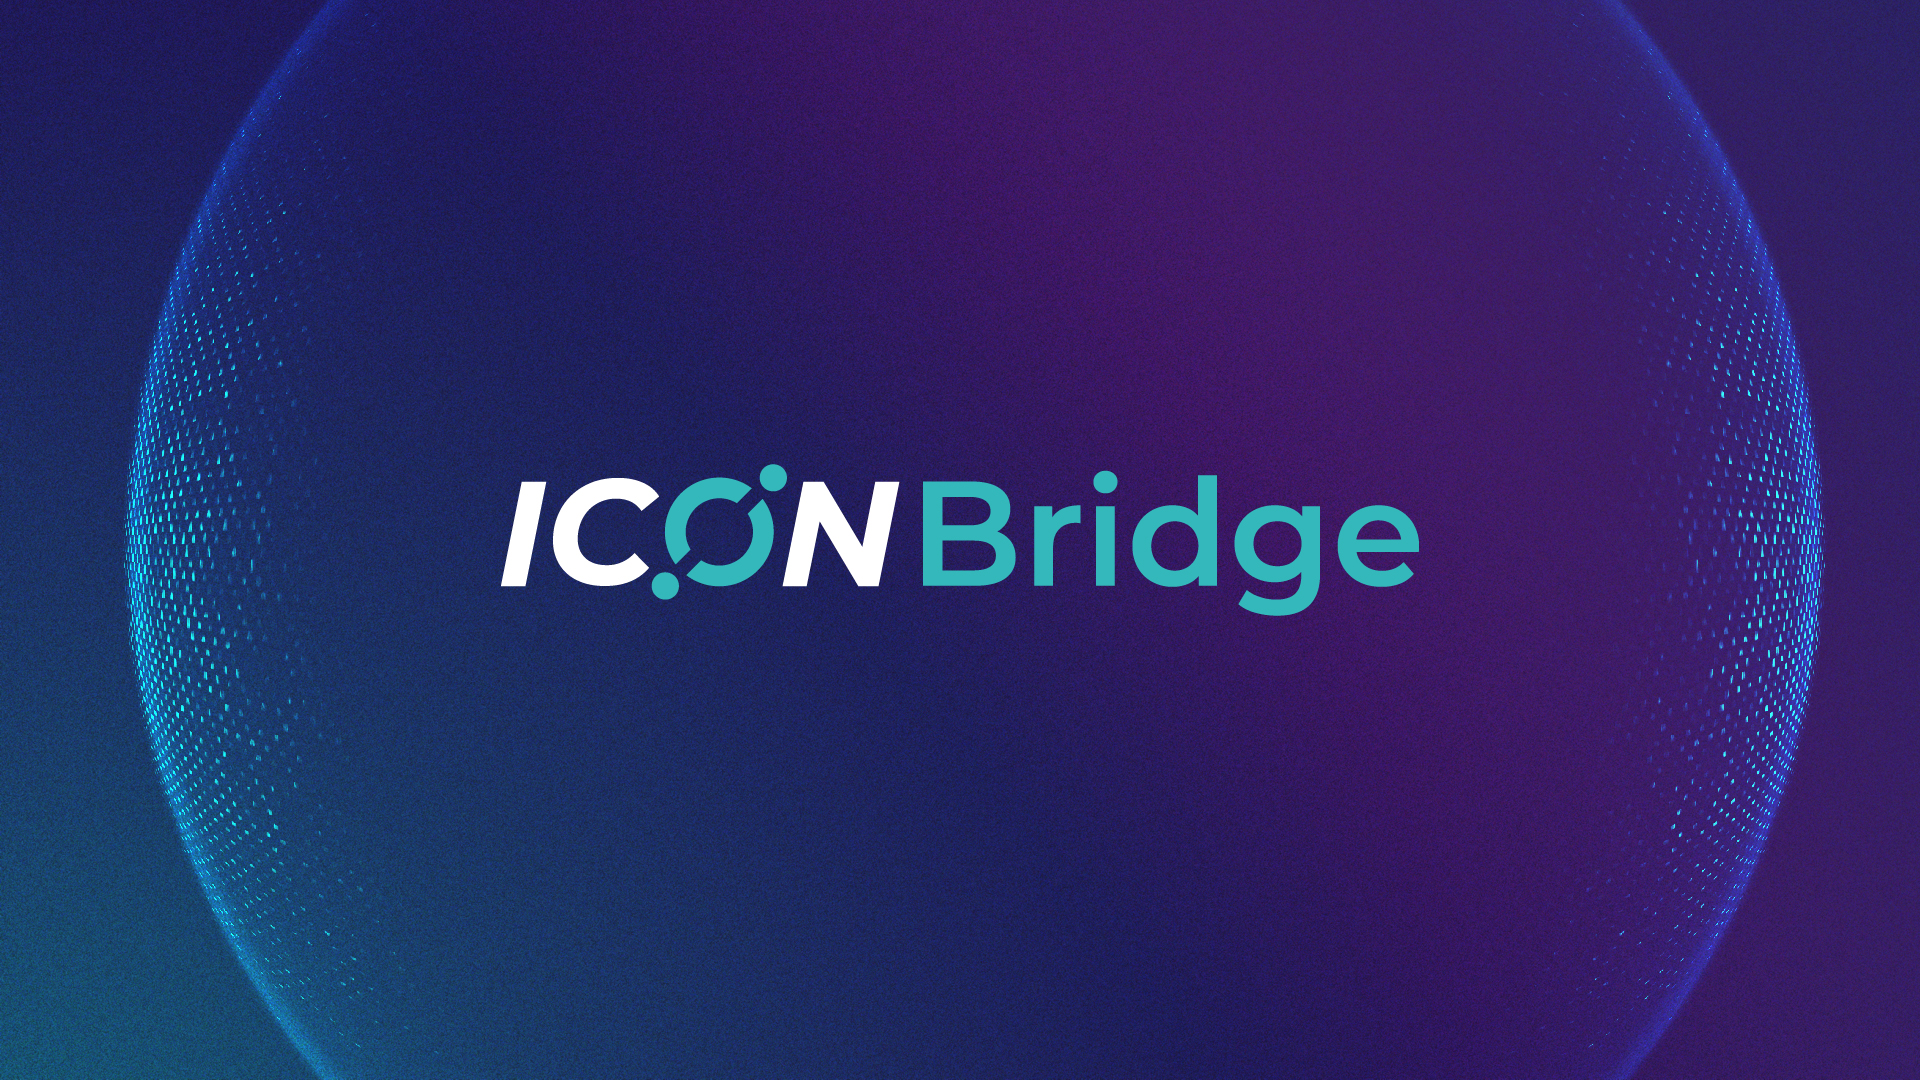 ICON Bridge is an early iteration of ICON’s cutting-edge interoperability product, BTP, which allows cross-chain transfers and integration with any blockchain that supports smart contracts.